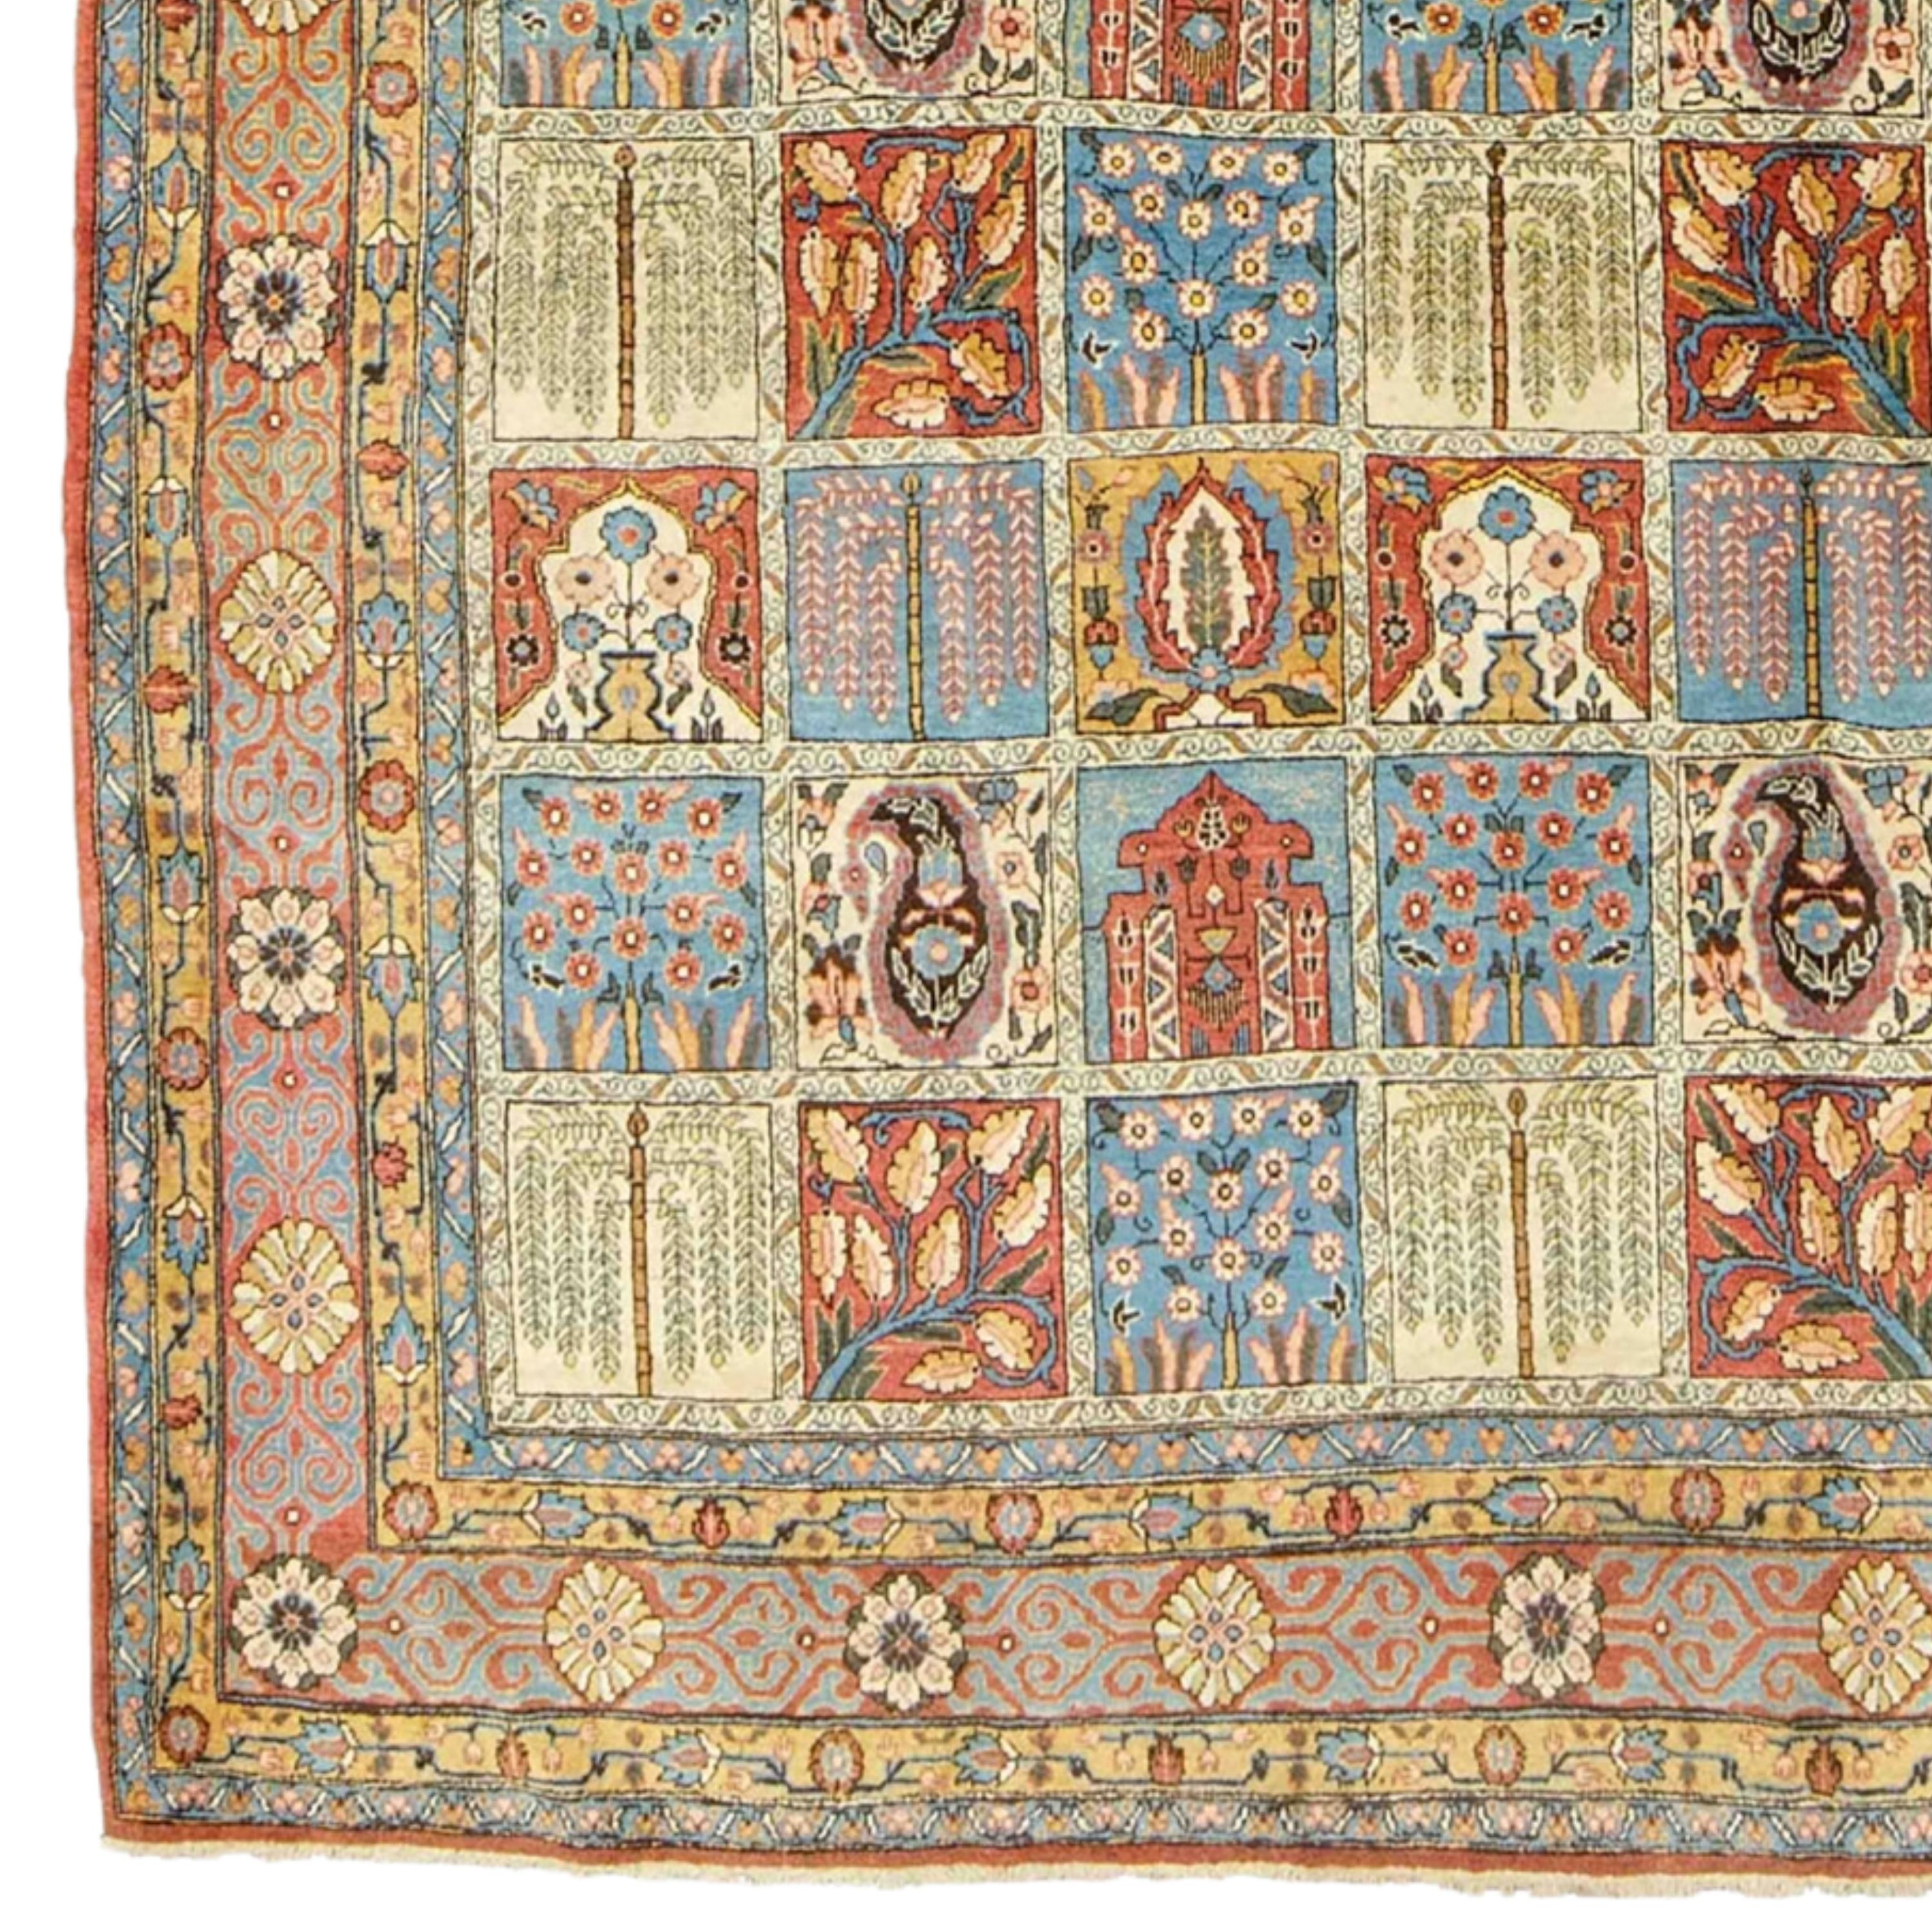 19th Century Ghoum Rug
Size: 246x343 cm

This impressive 19th century Ghoum Tapestry is a masterpiece reflecting the elegant and sophisticated craftsmanship of a historic period.

Rich Patterns: The carpet is decorated with intricate floral motifs